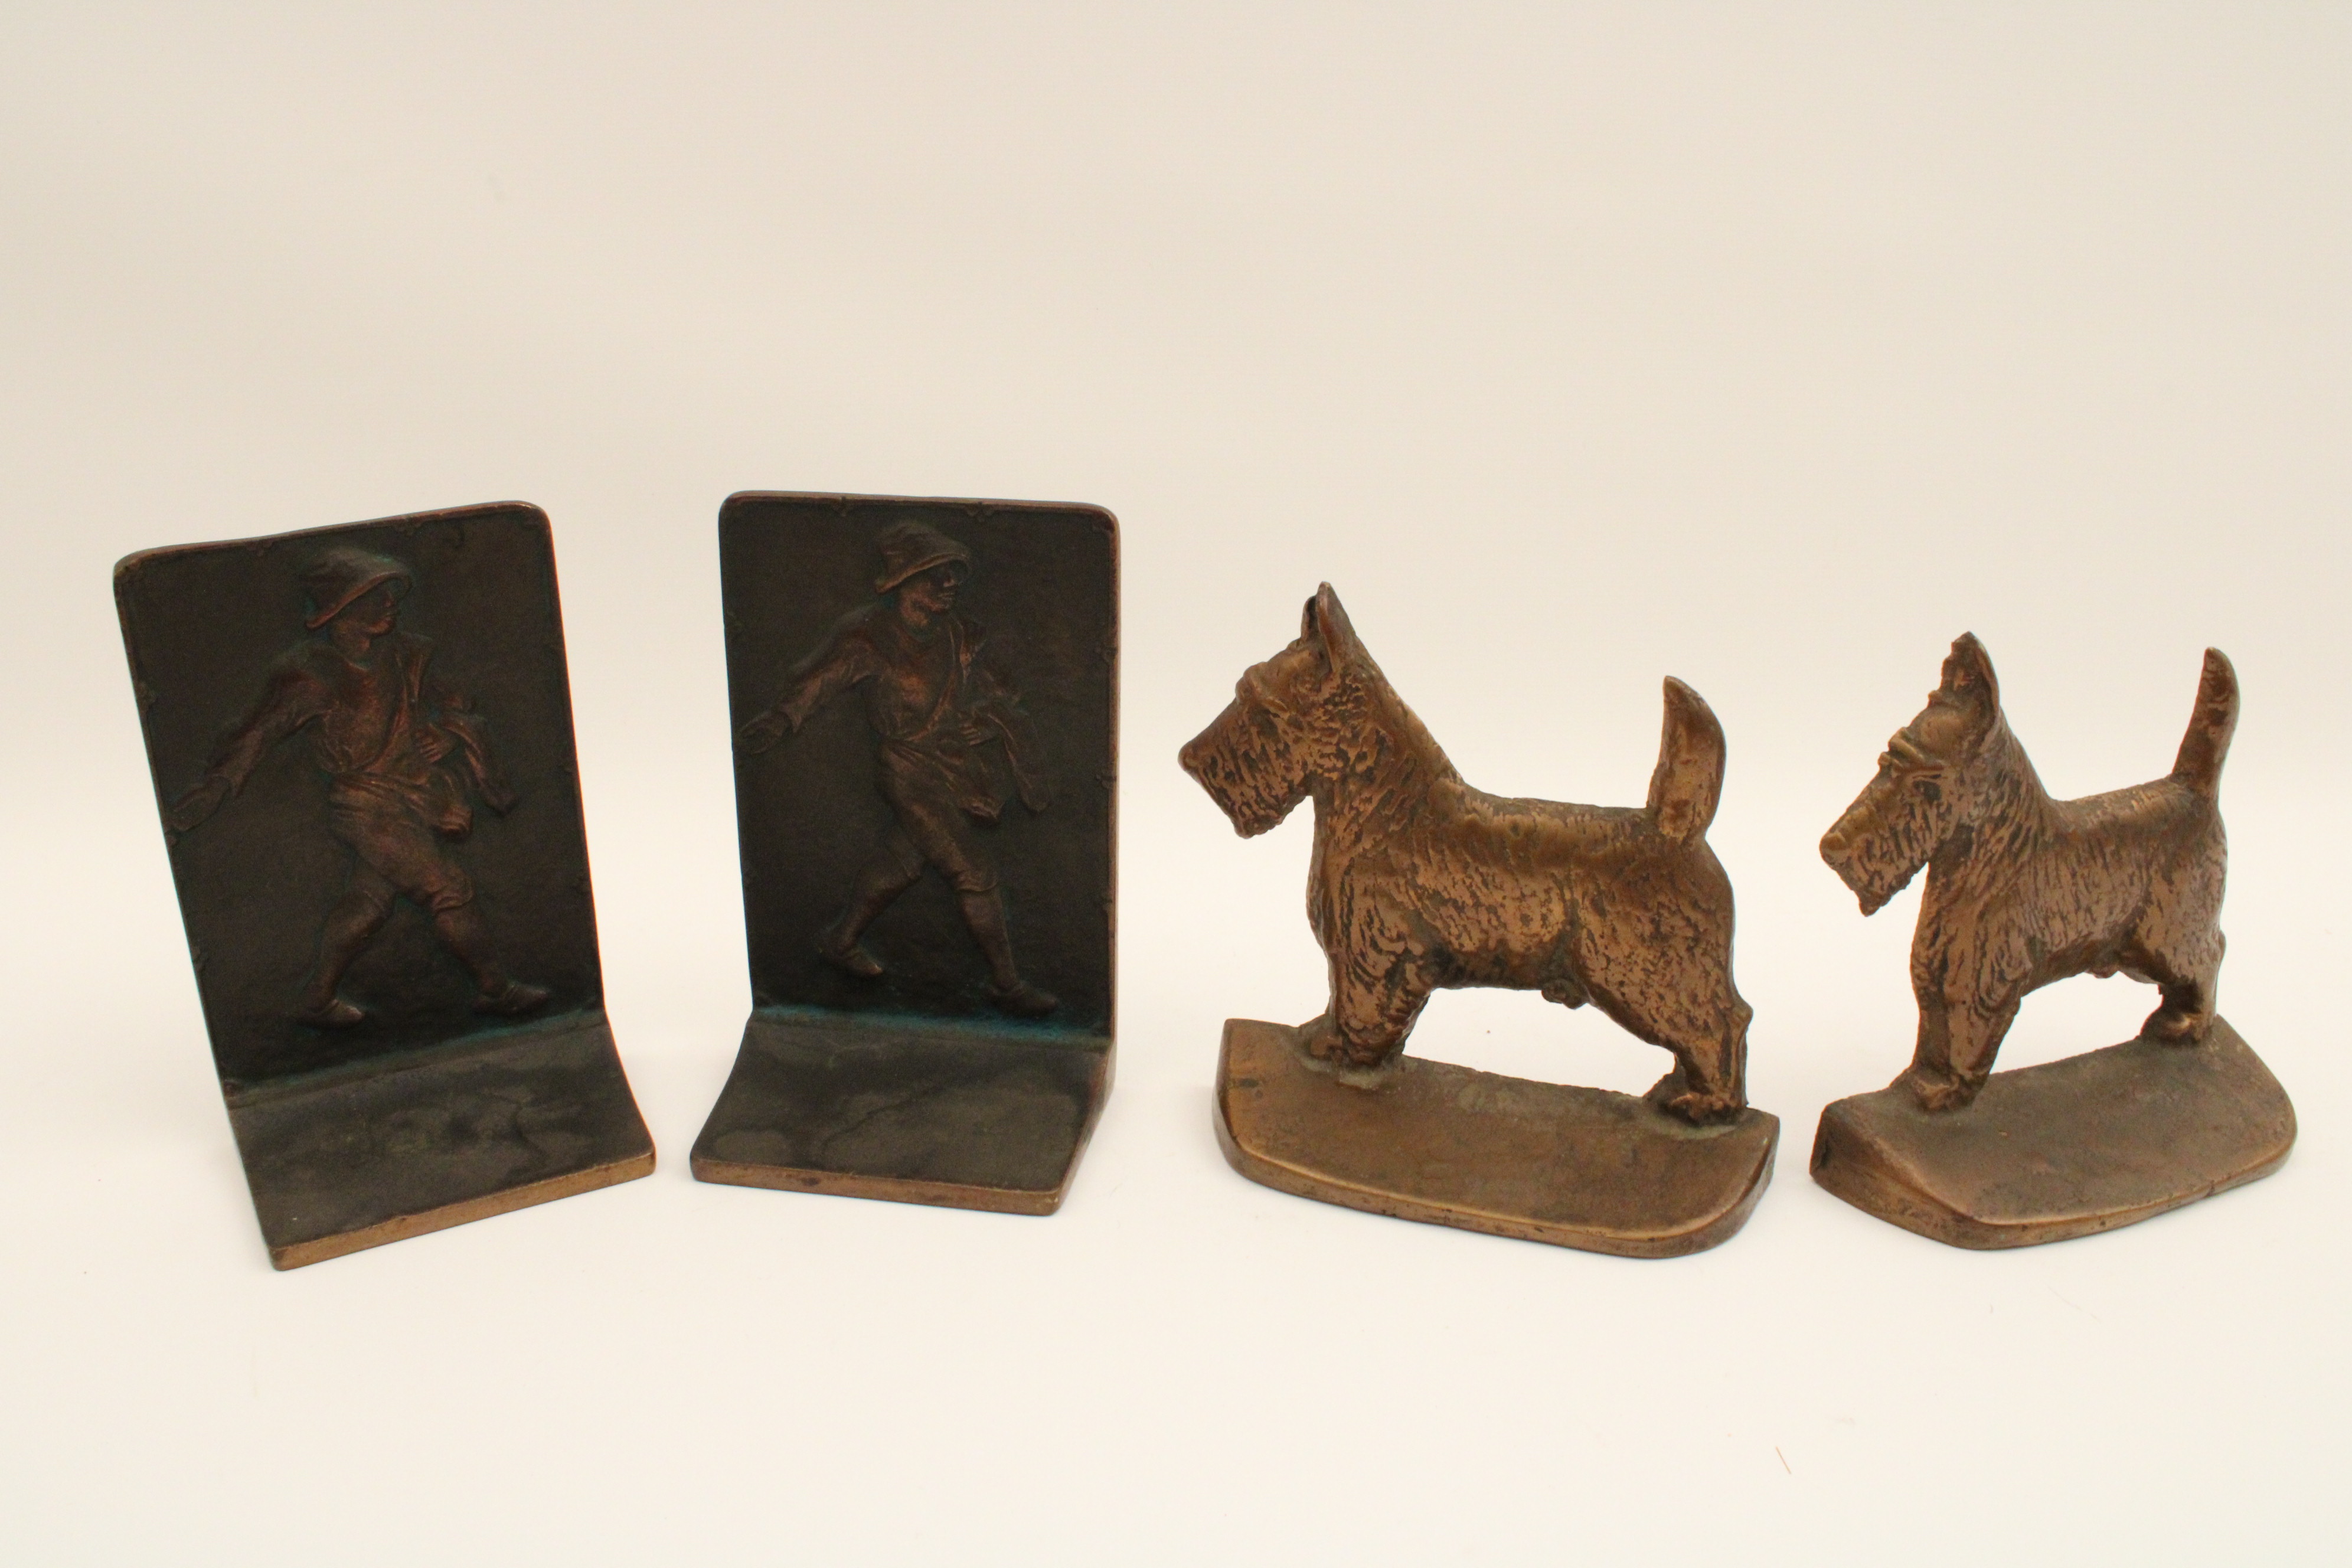 2 PAIRS OF BRONZE BOOKENDS TWO